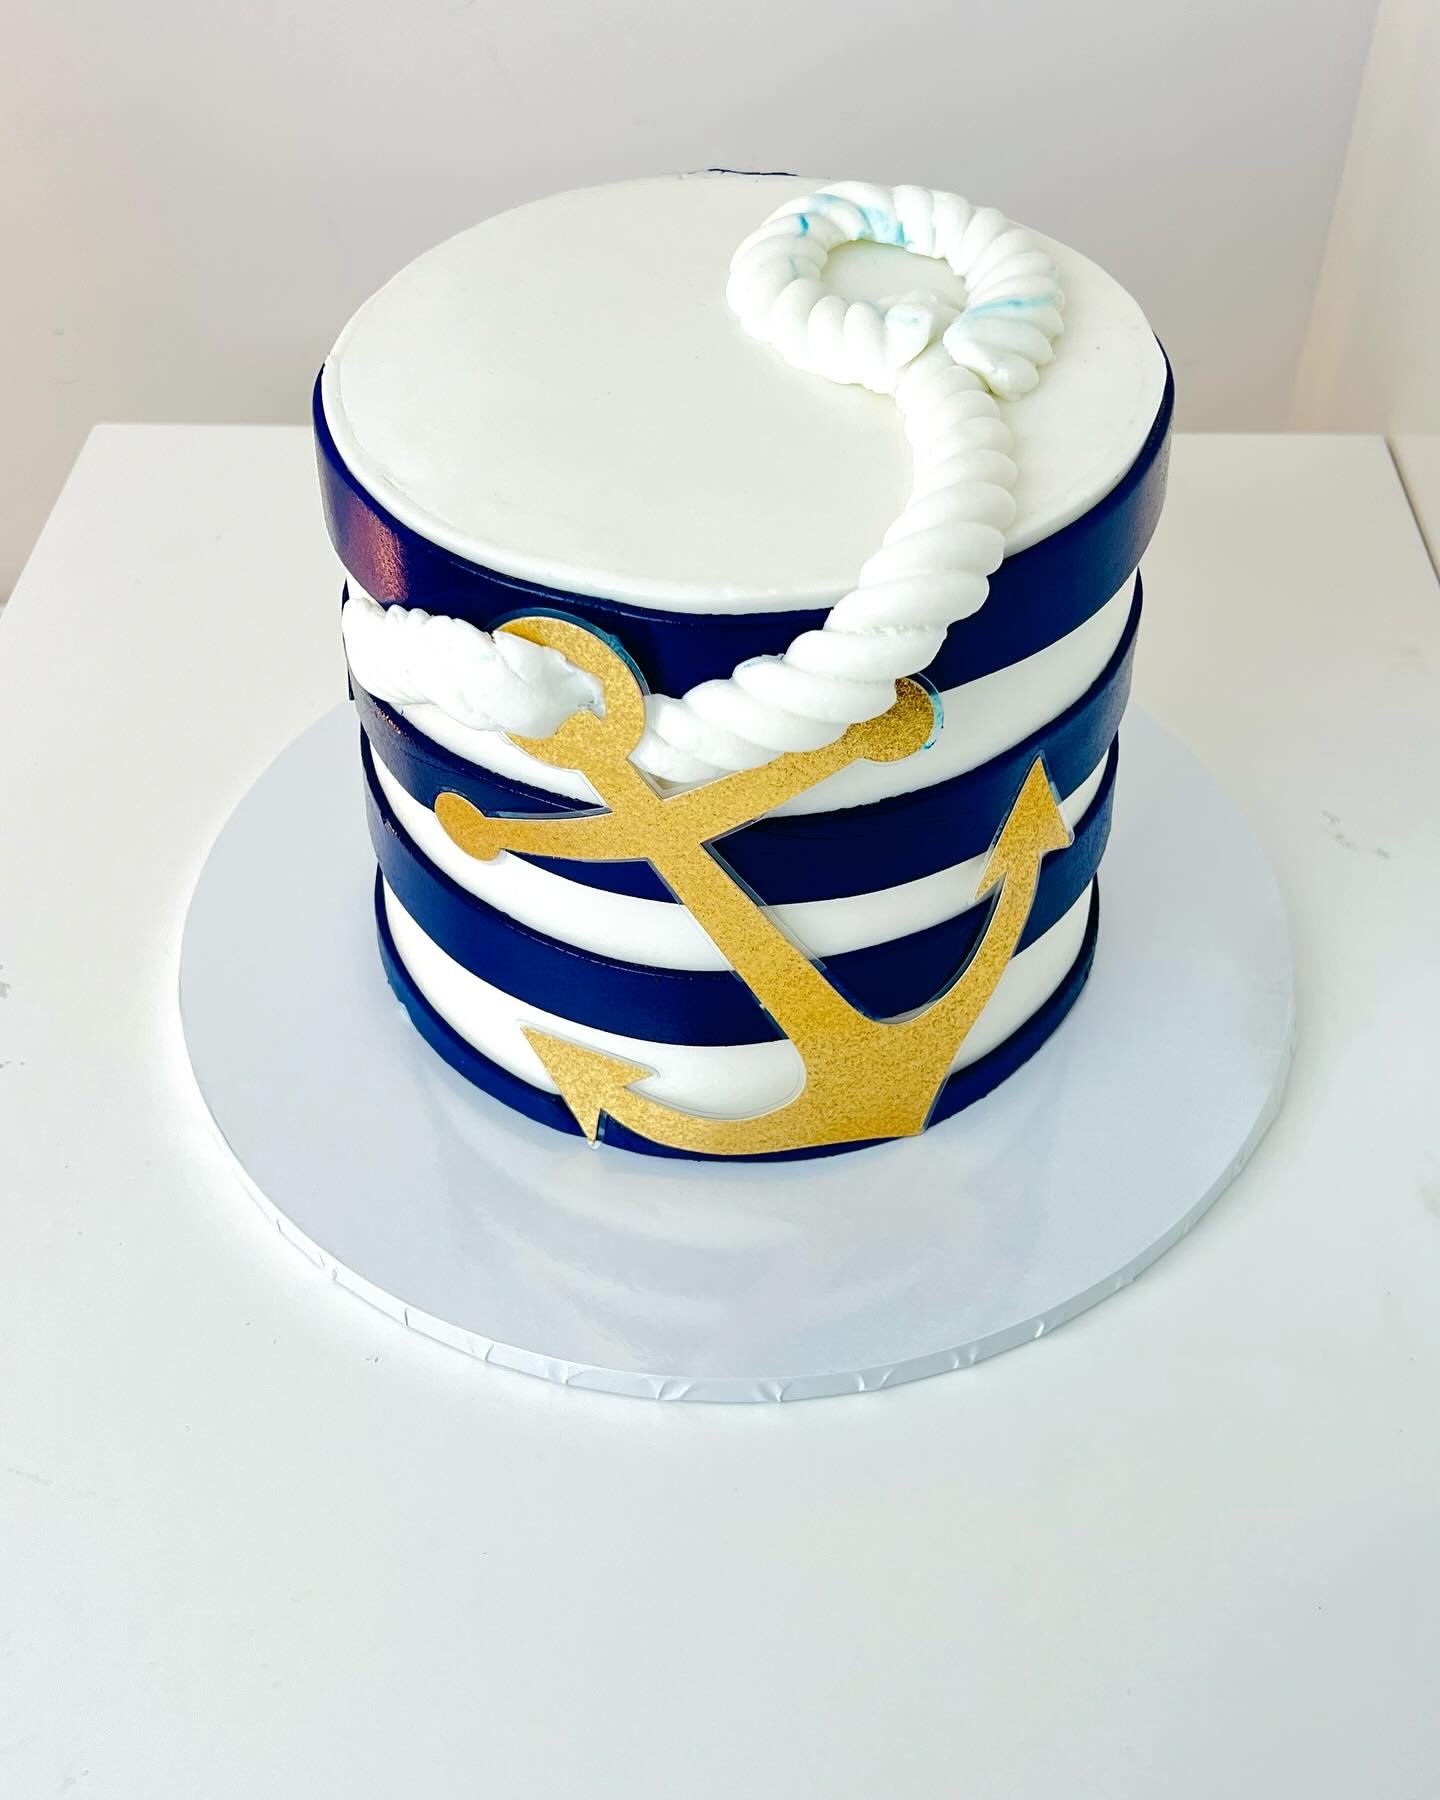 Anchor themed cake ⚓️⚓️
Layers of vanilla sponge and strawberry jam as requested.
Hit the link for availability and to chat with us.
#anchorthemecake